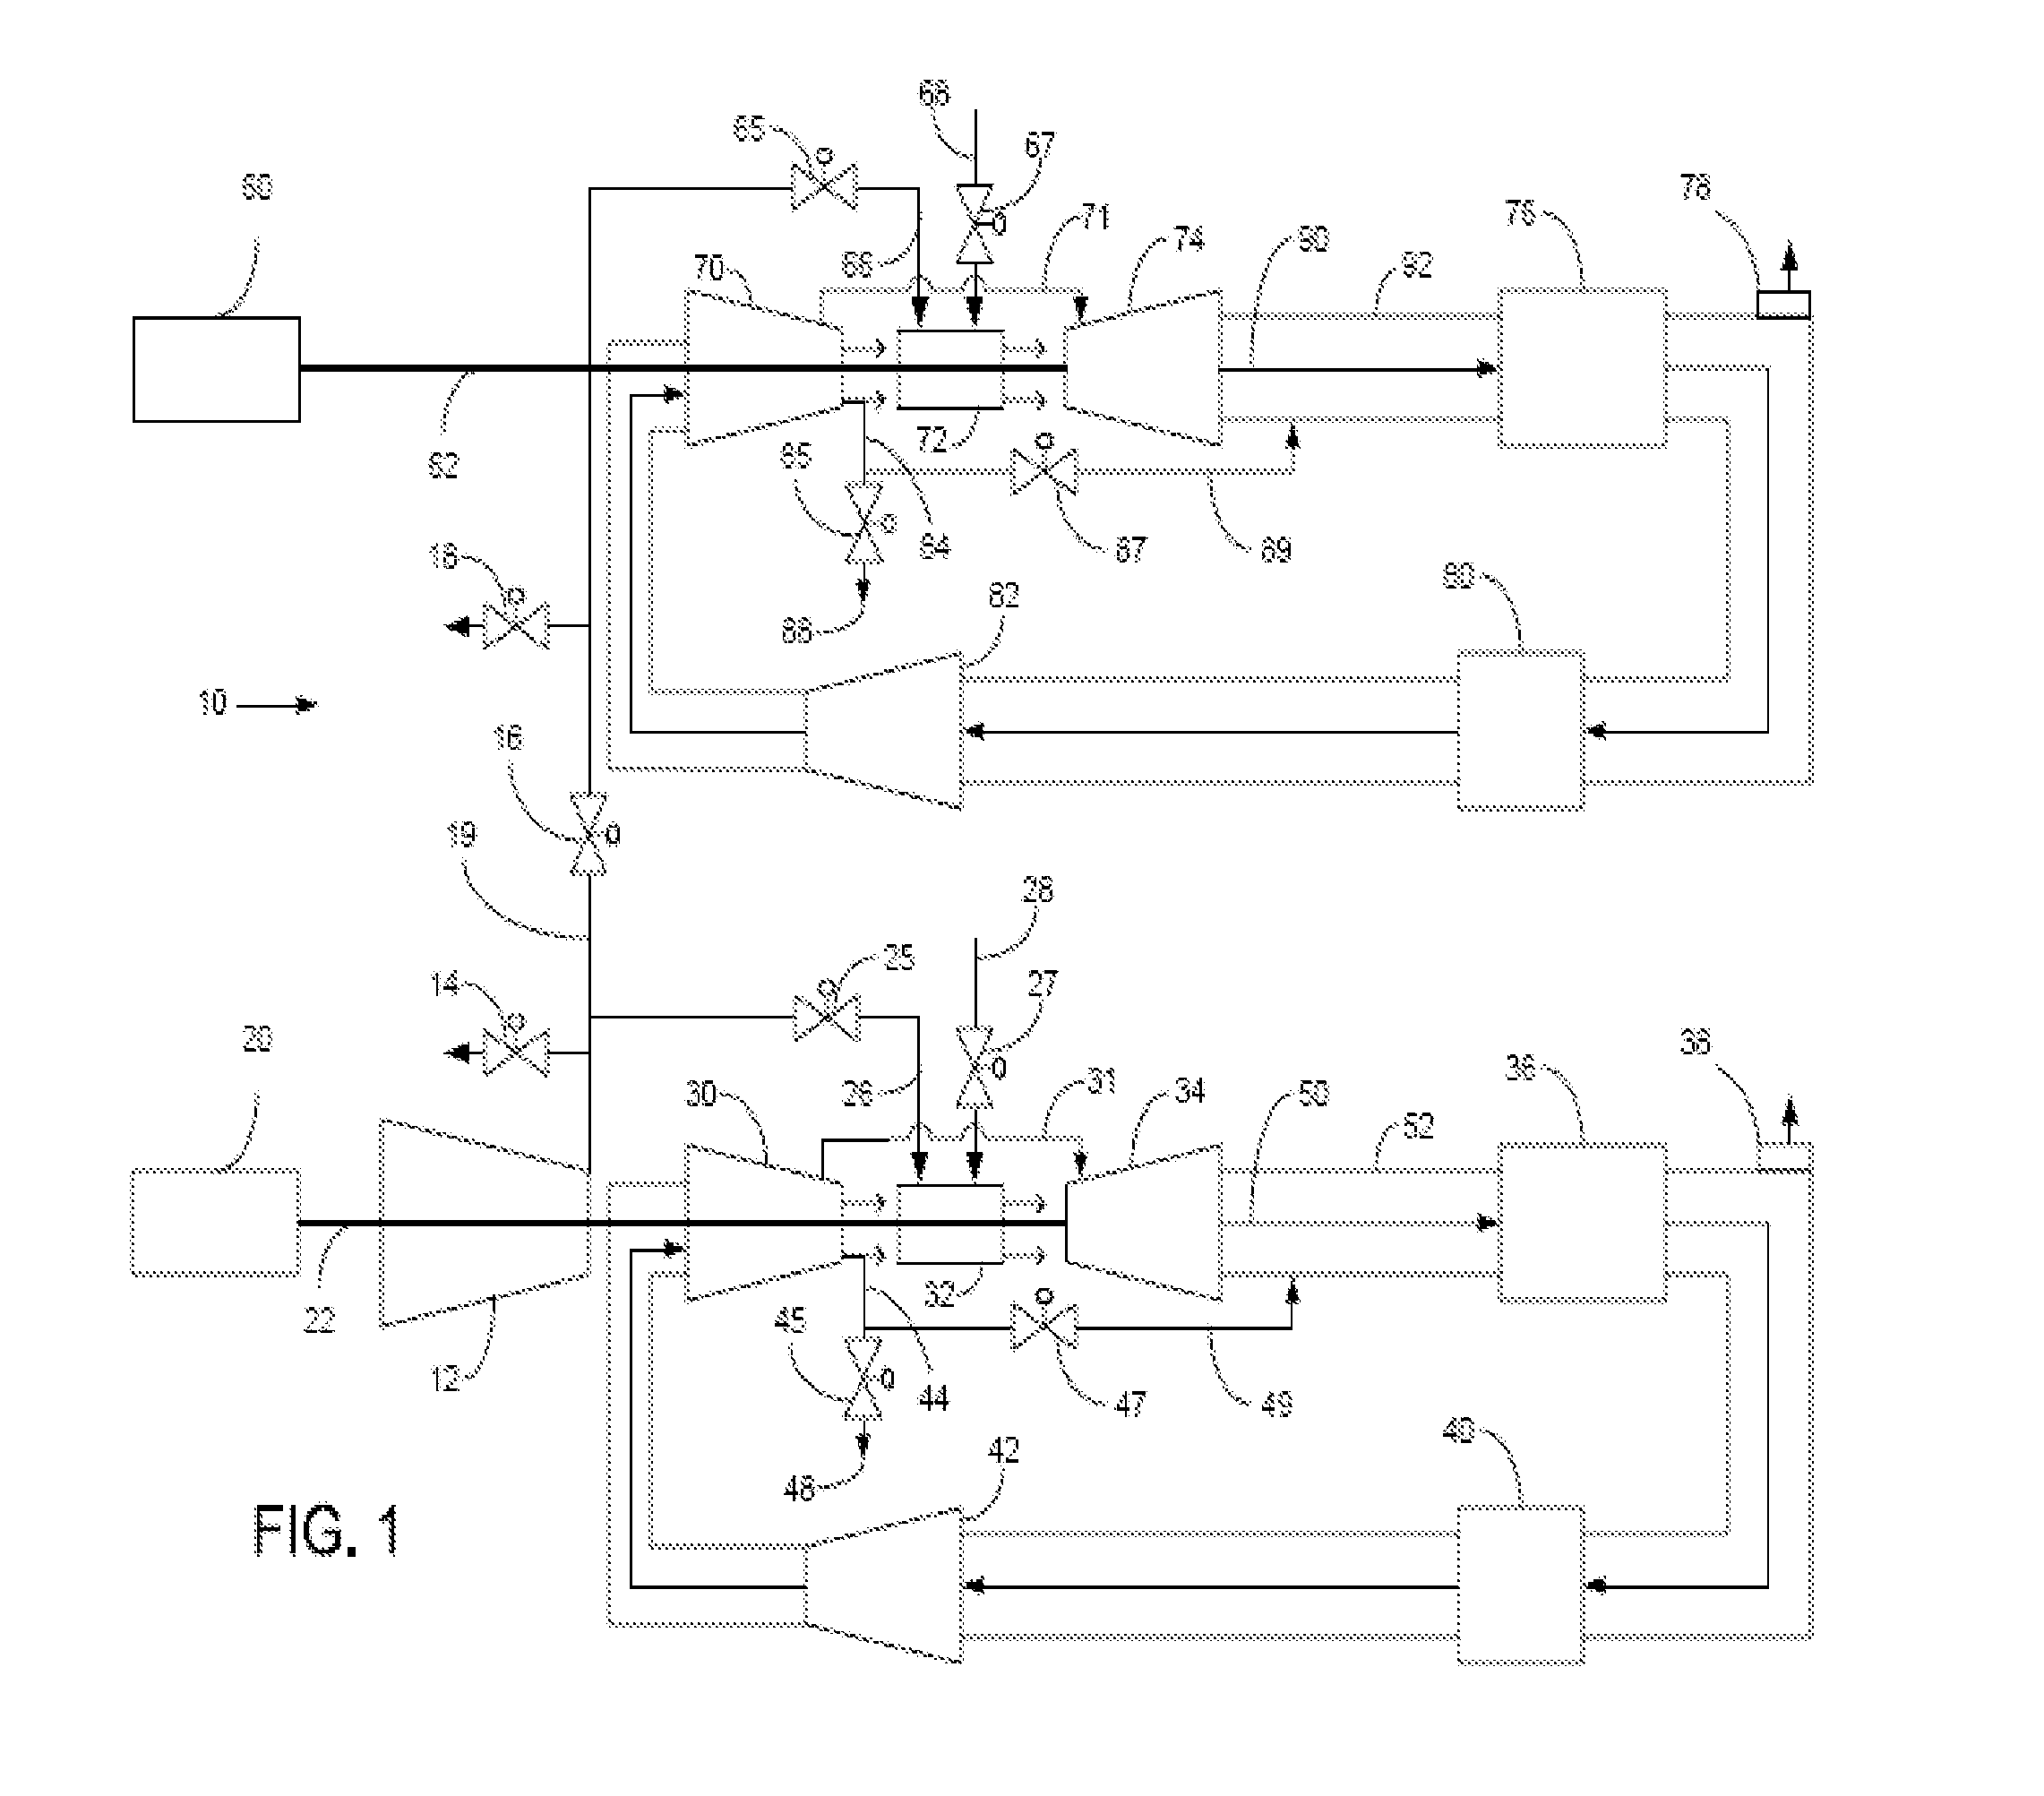 Method of operating a stoichiometric exhaust gas recirculation power plant